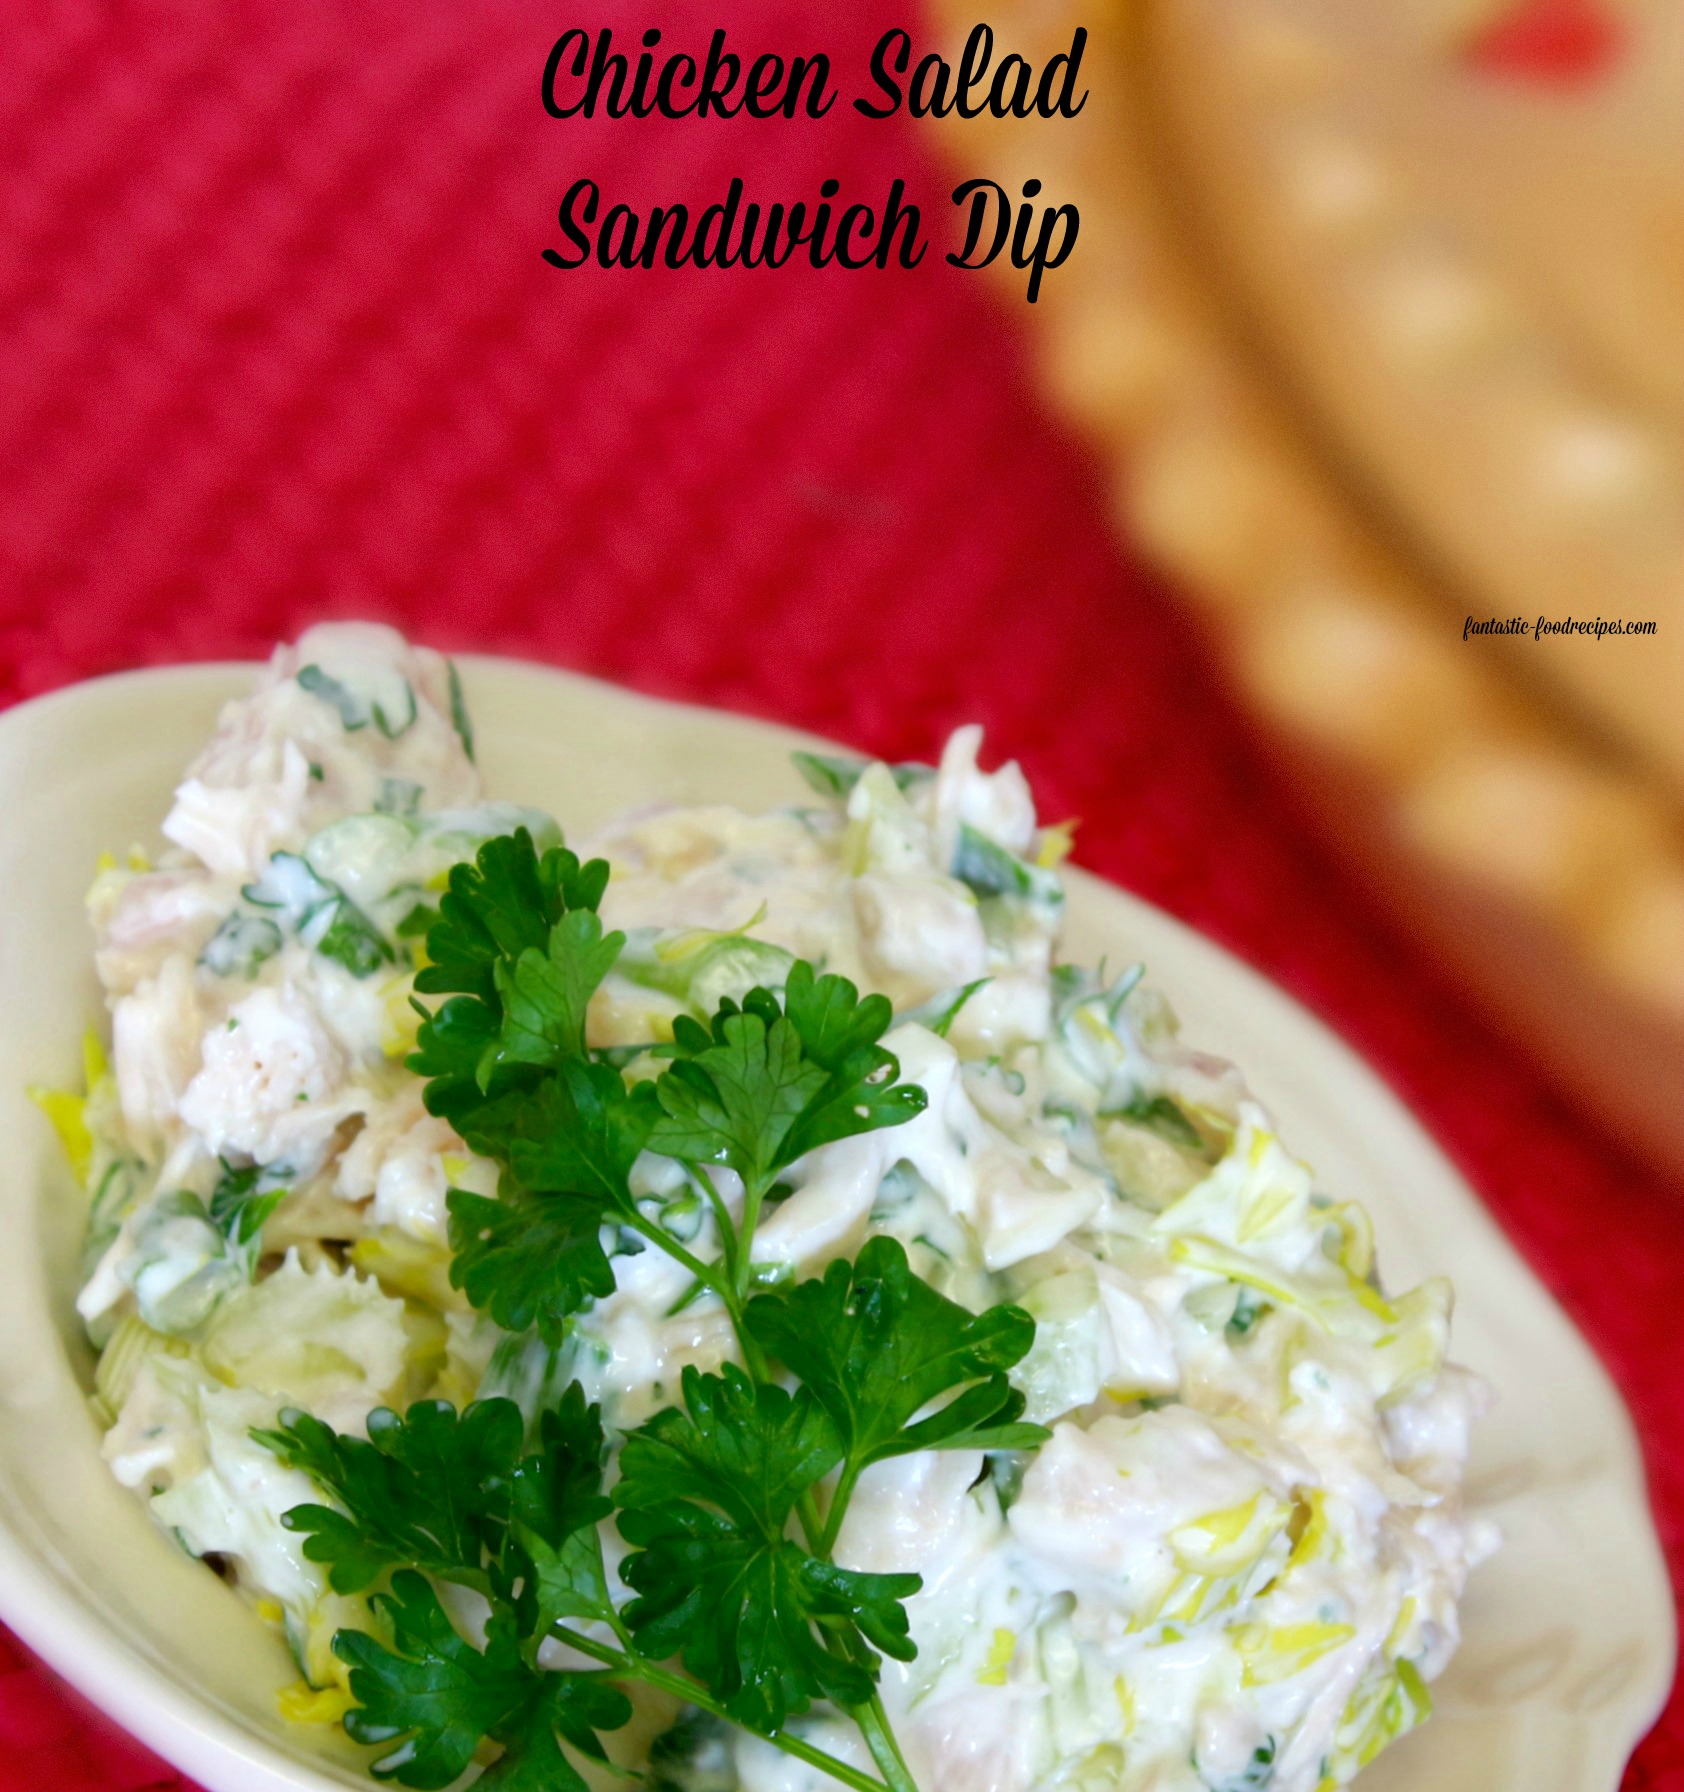 Chicken Salad Sandwich Dip<p><!-- adsense ad injection by Adsense Explosion failed - suspected violation of Policy Content (https://support.google.com/adsense/bin/answer.py?stc=aspe-1pp-it&answer=48182) - detect <crack> word (with crackers      a)--></p>